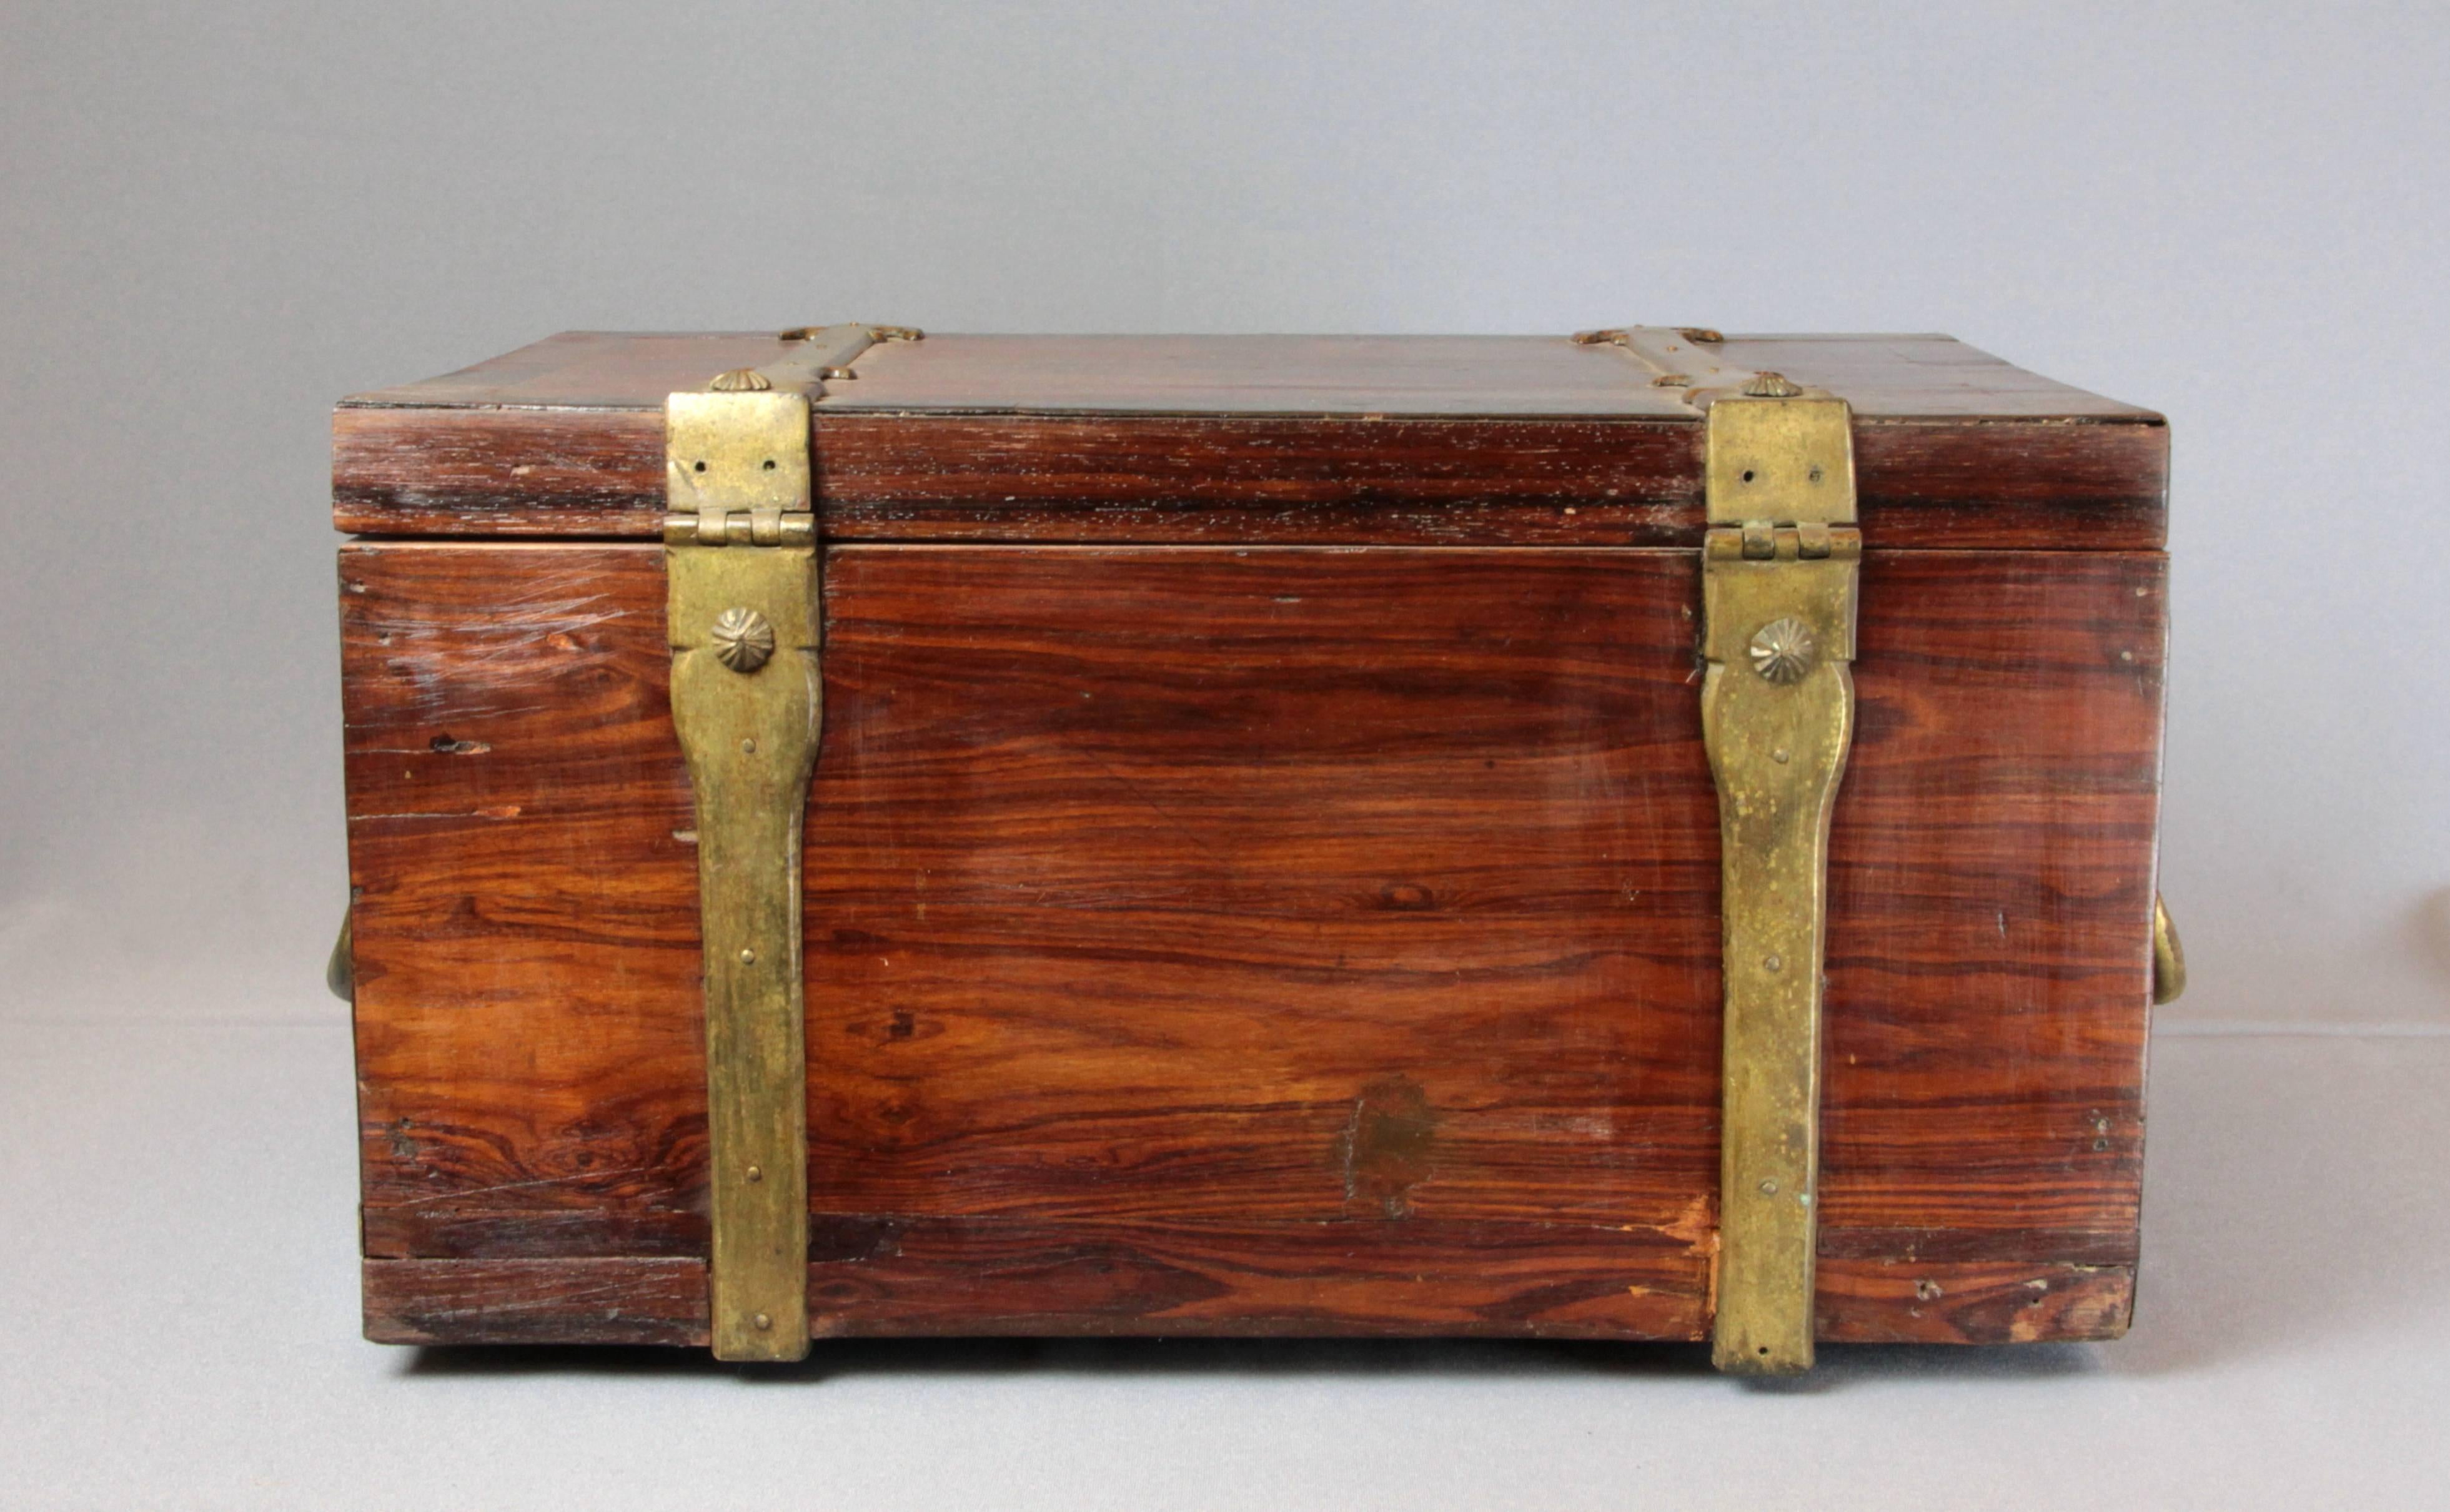 Small 19th century wooden chest.
Interior with two drawers. Brazilian rosewood veneer and brass handles
Portugal, 19th century
